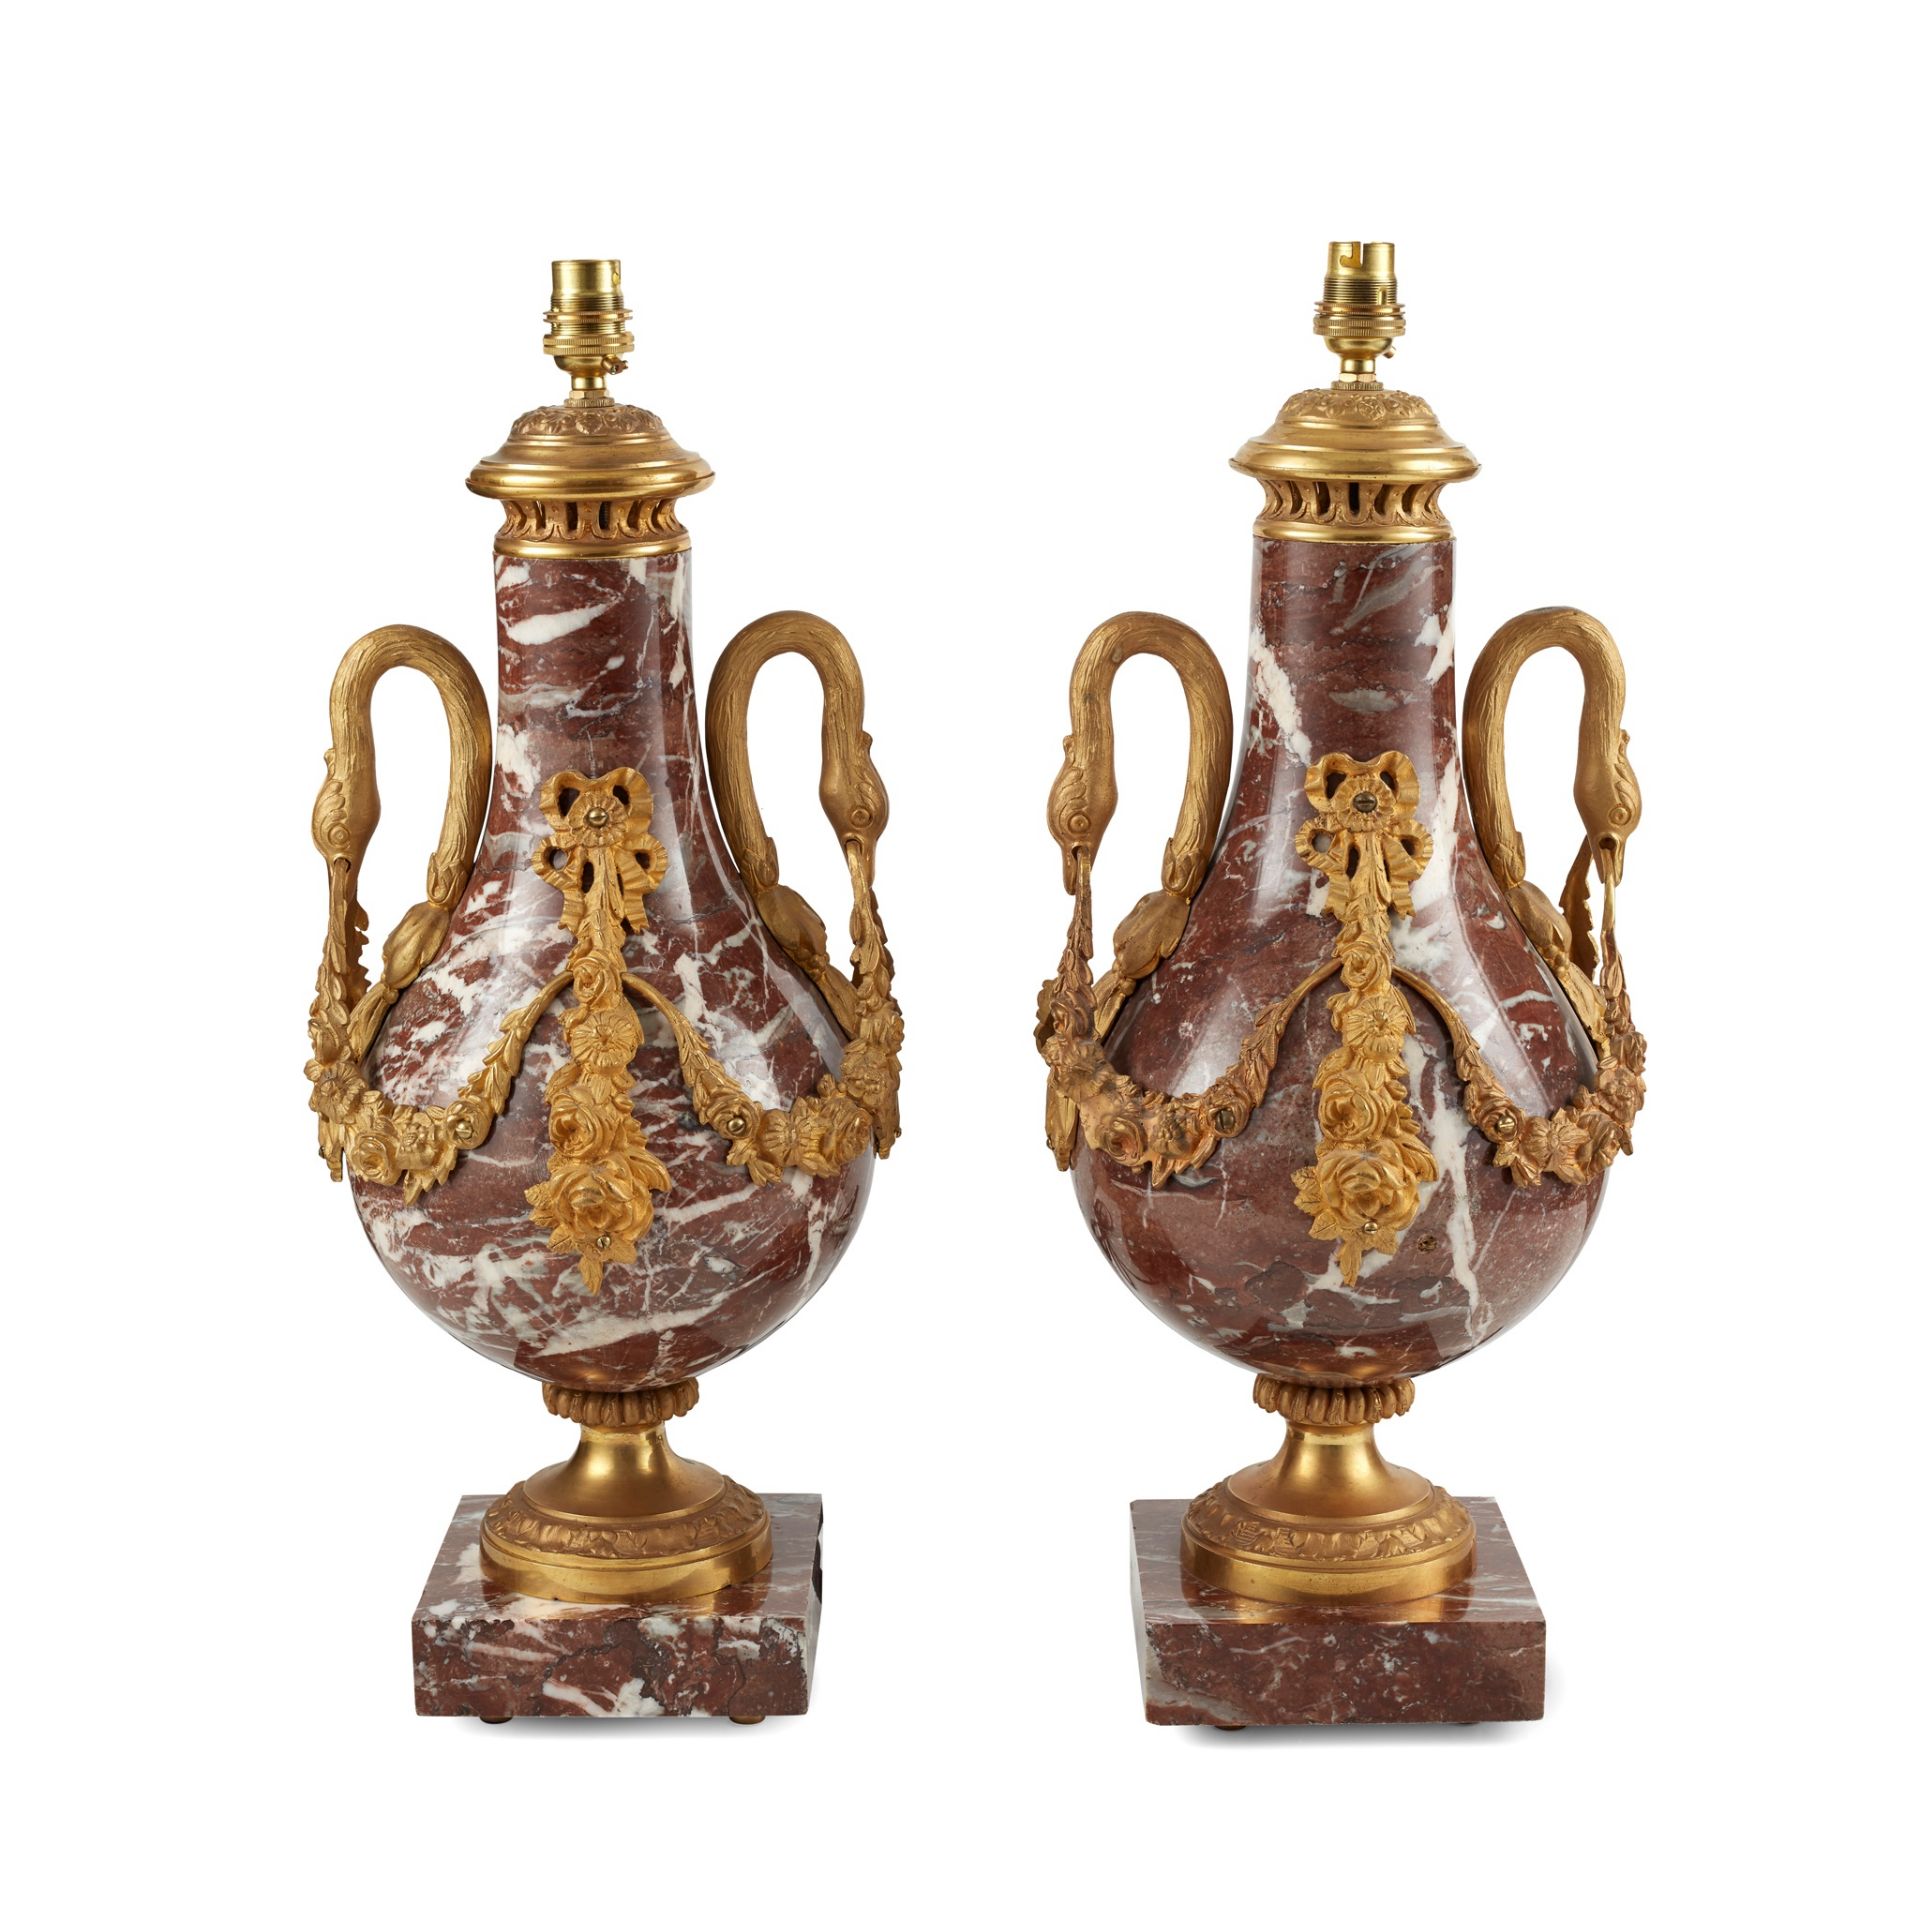 PAIR OF LOUIS XVI STYLE ROUGE MARBLE AND GILT METAL MOUNTED LAMPS LATE 19TH/ EARLY 20TH CENTURY